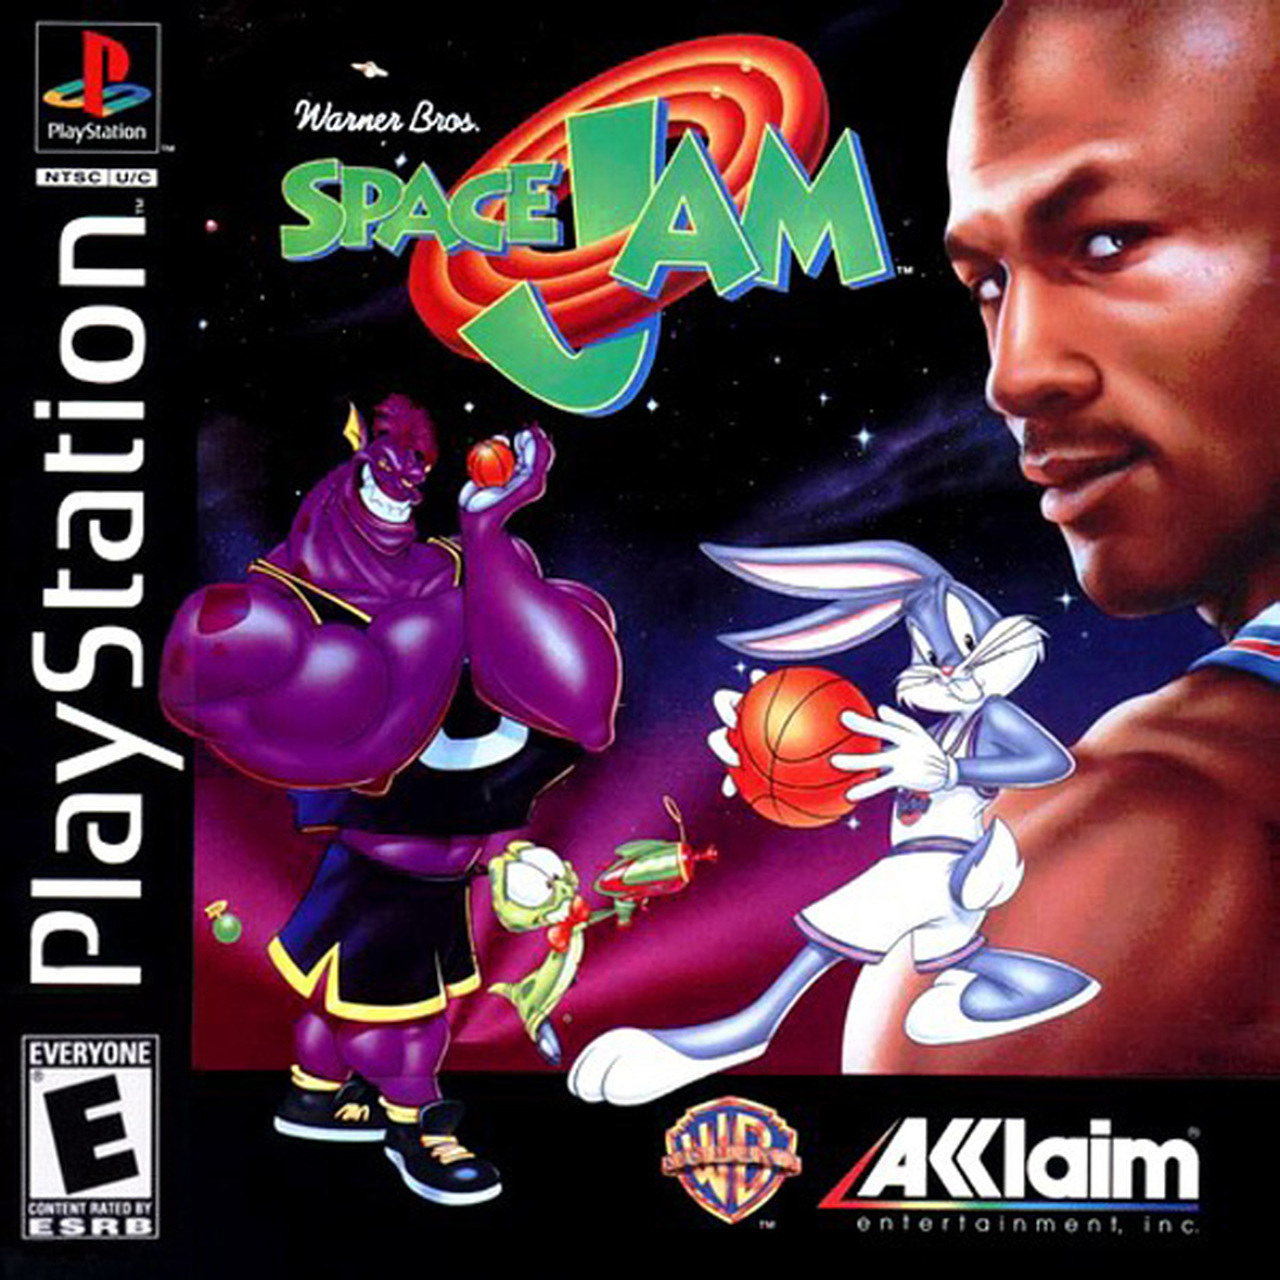 Michael Jordan and Bugs Bunny on the cover of the &quot;Space Jam&quot; game